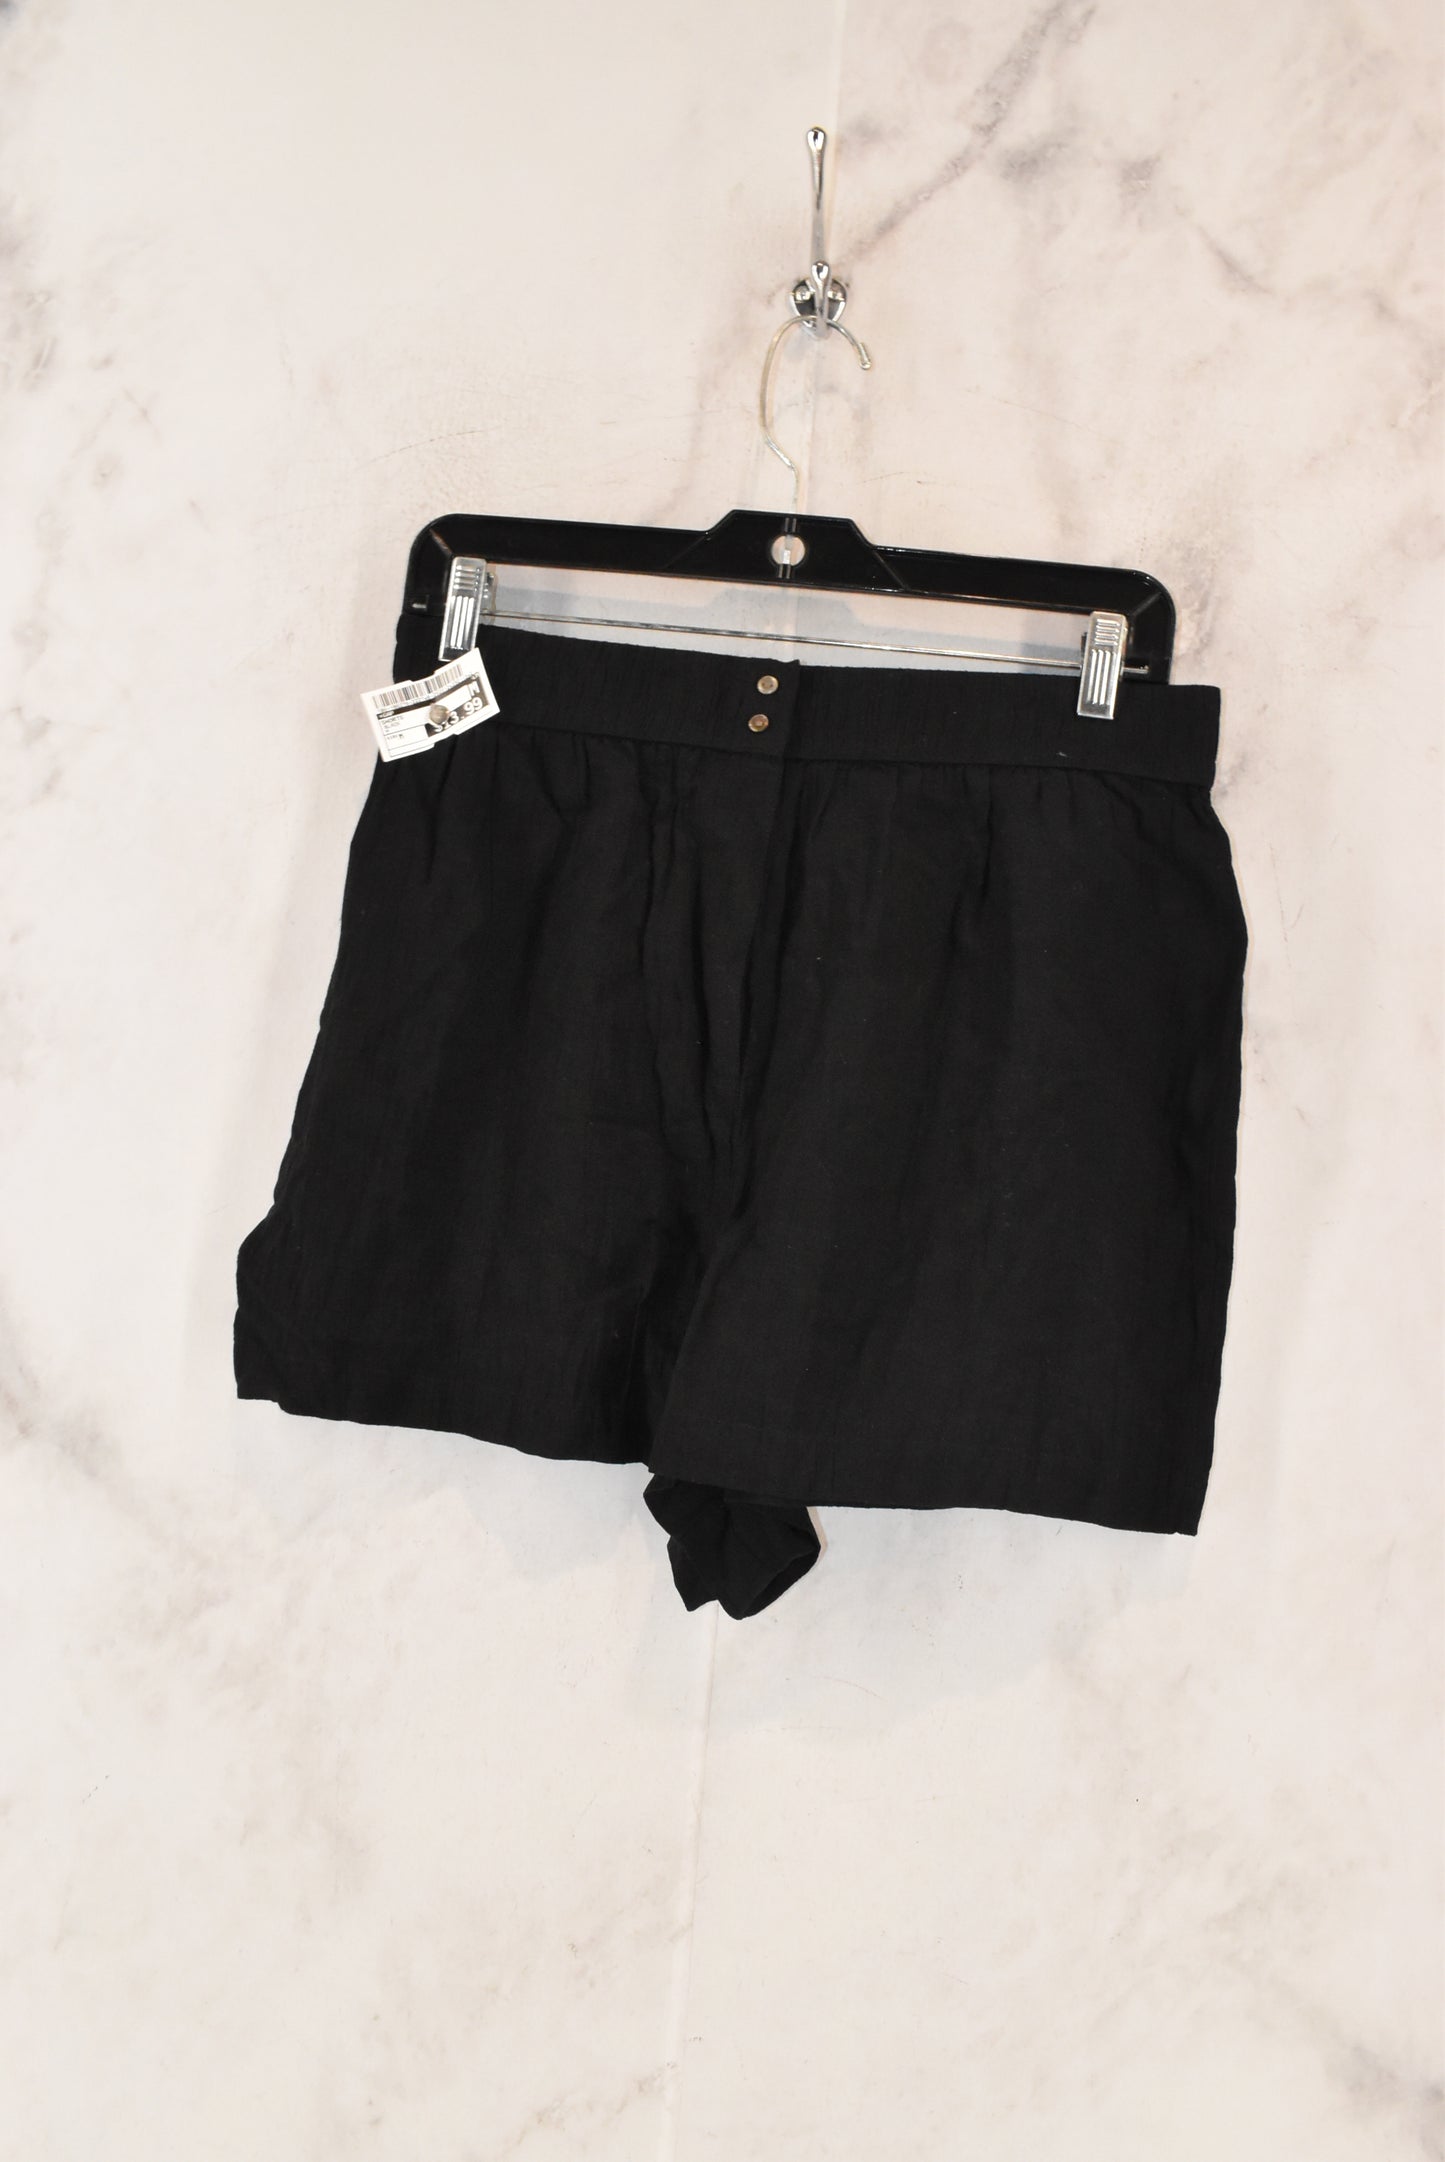 Shorts By Gap  Size: M